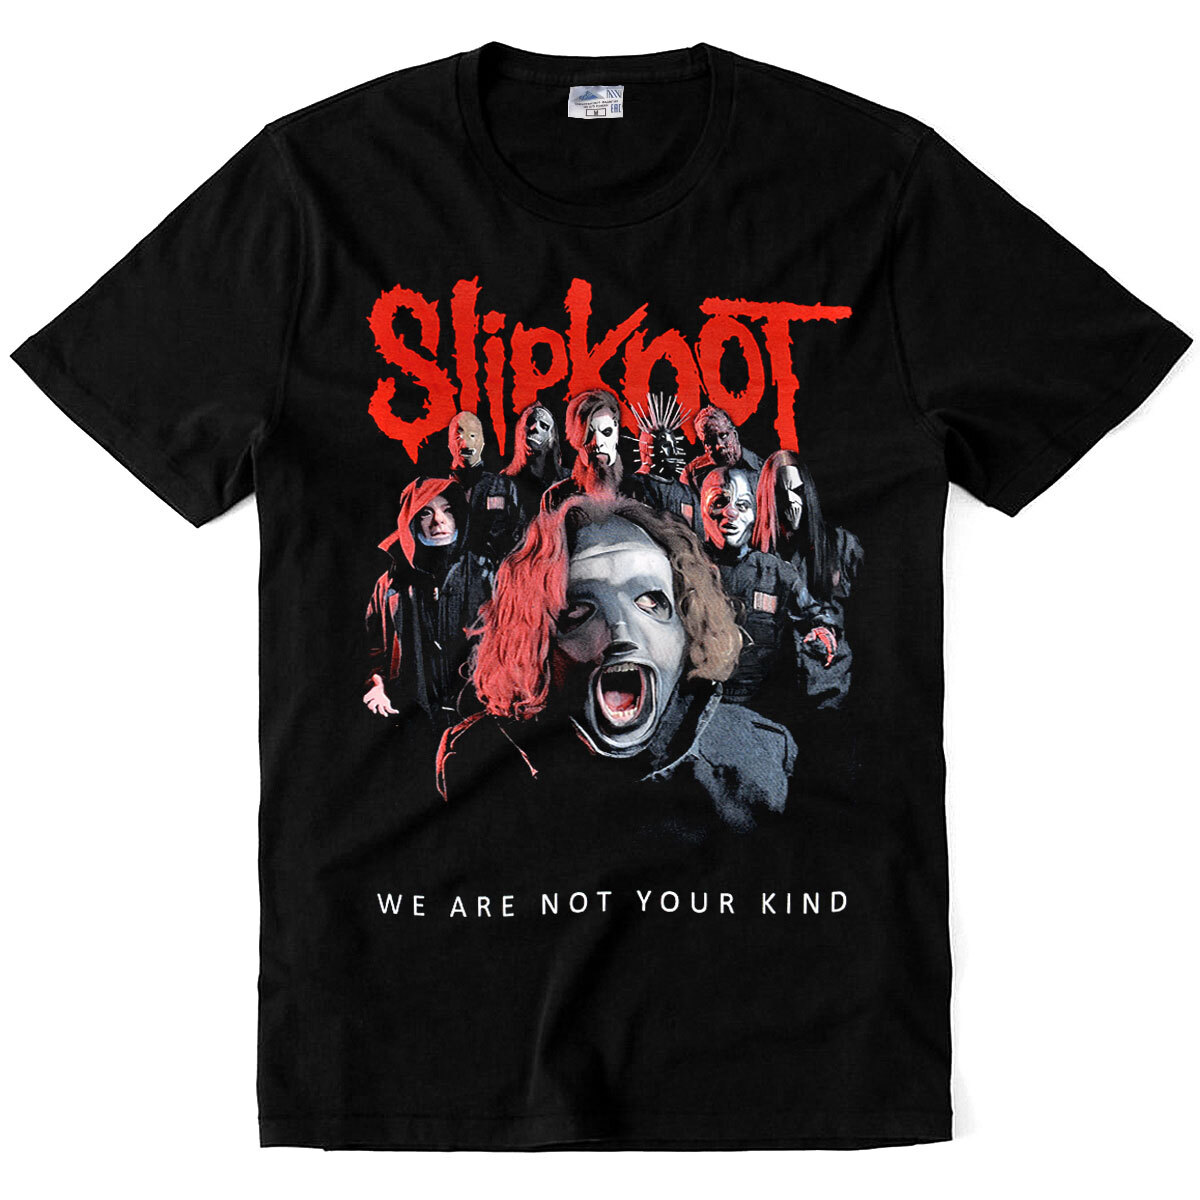 Slipknot kind. Футболка Slipknot we are not your kind. Мерч слипкнот we are not your kind.